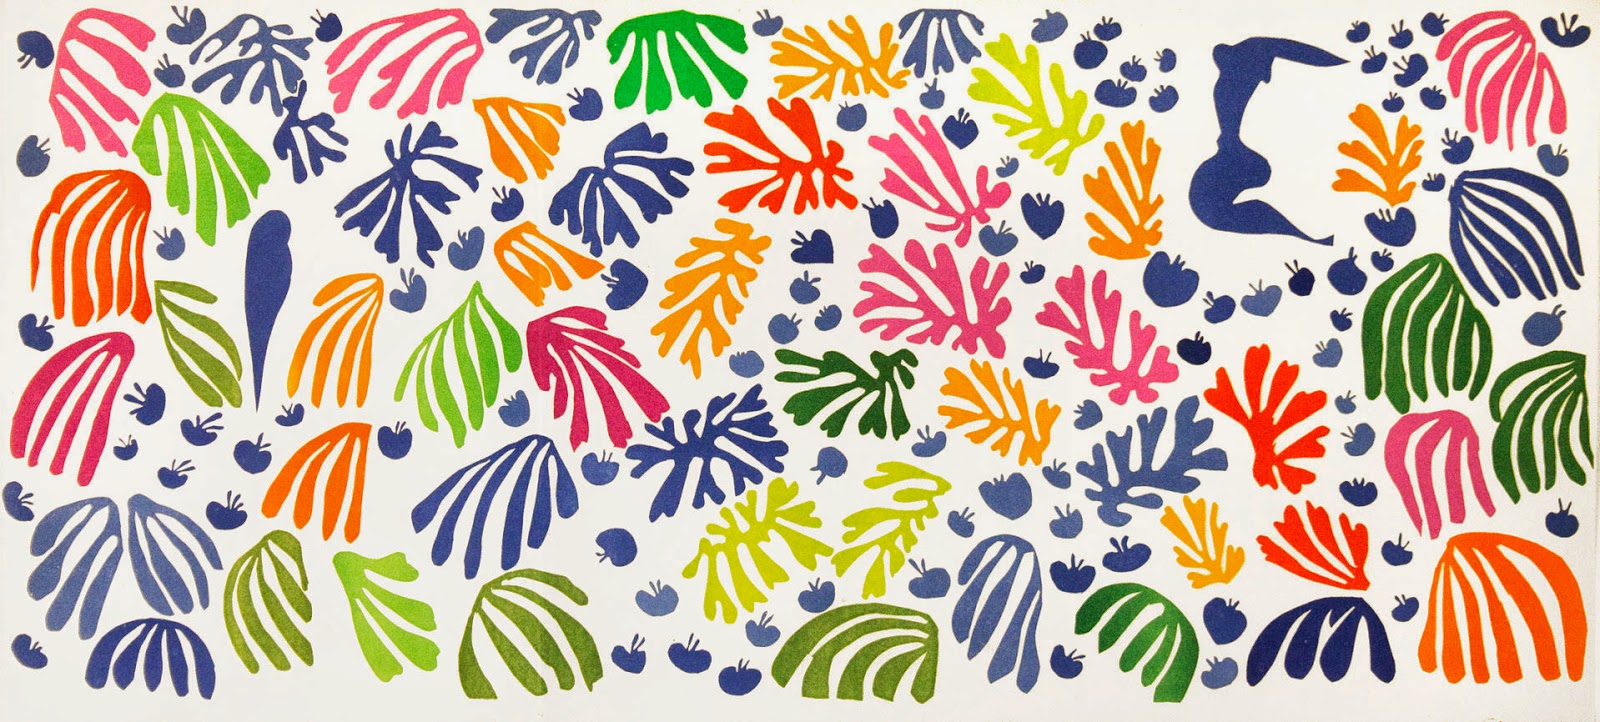 Teaching Art History to Preschoolers can be engaging and full of process art invitations. Check out our favorite art activities inspired by Henri Matisse